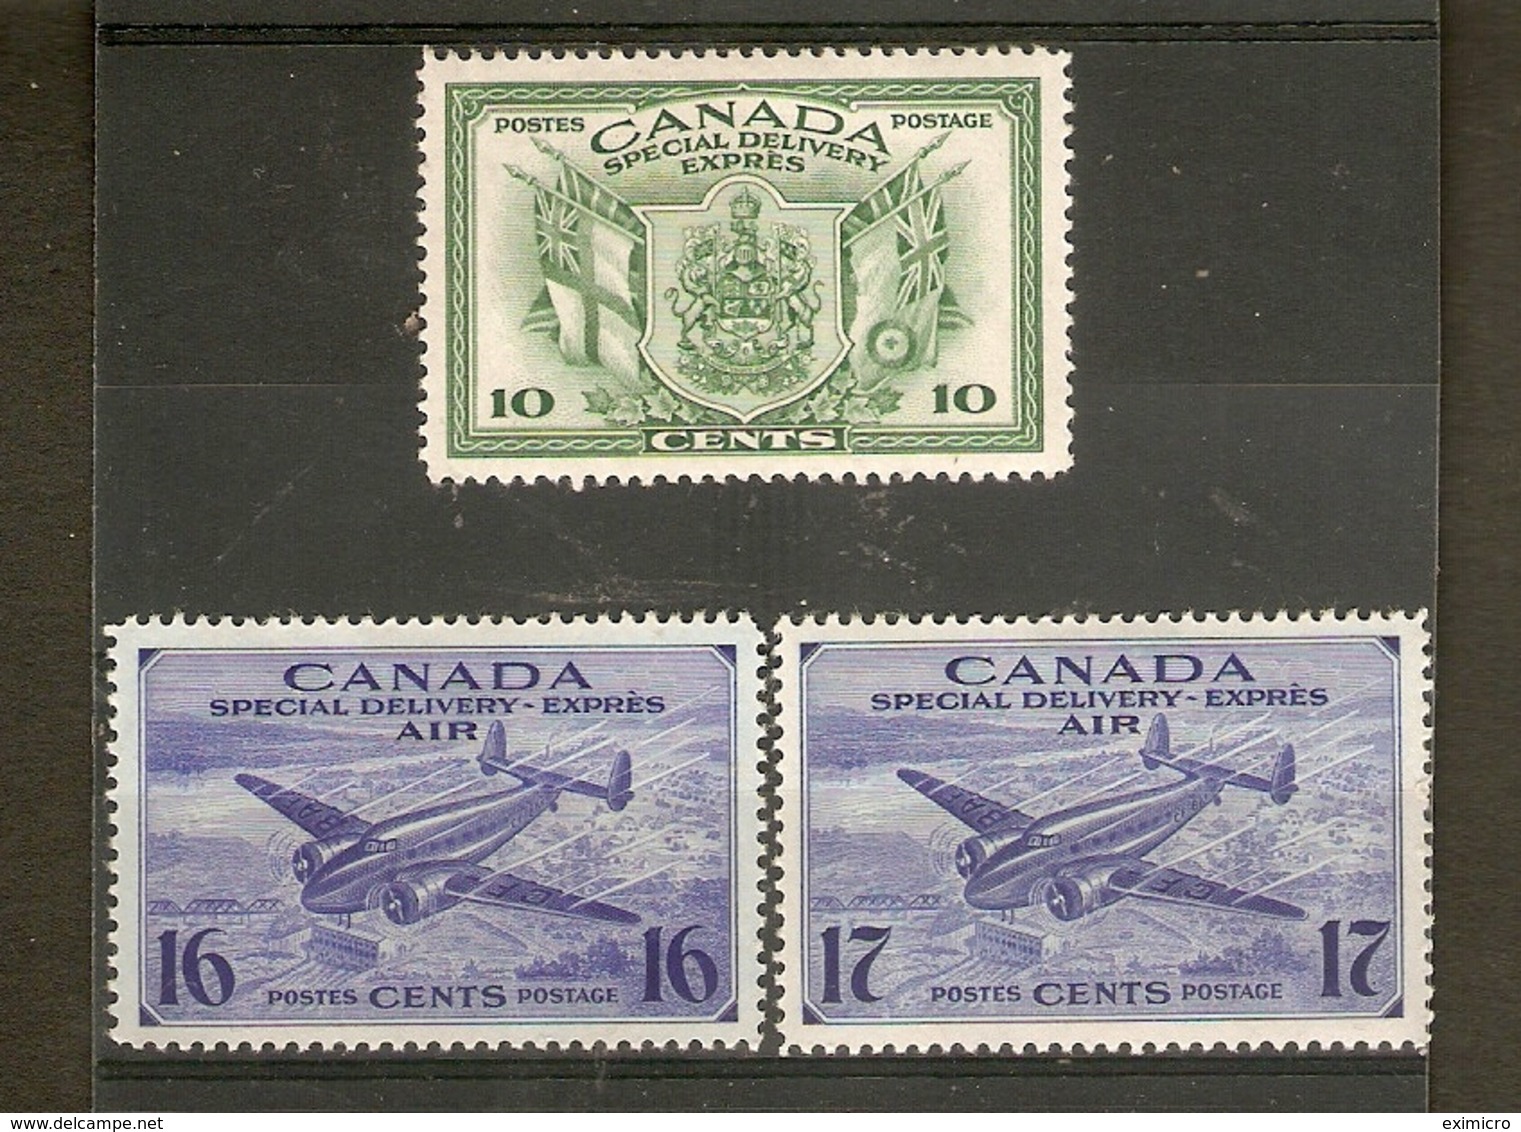 CANADA 1942 - 1943 SPECIAL DELIVERY WAR EFFORT SET SG S12/S14 MOUNTED MINT Cat £24.50 - Luftpost-Express